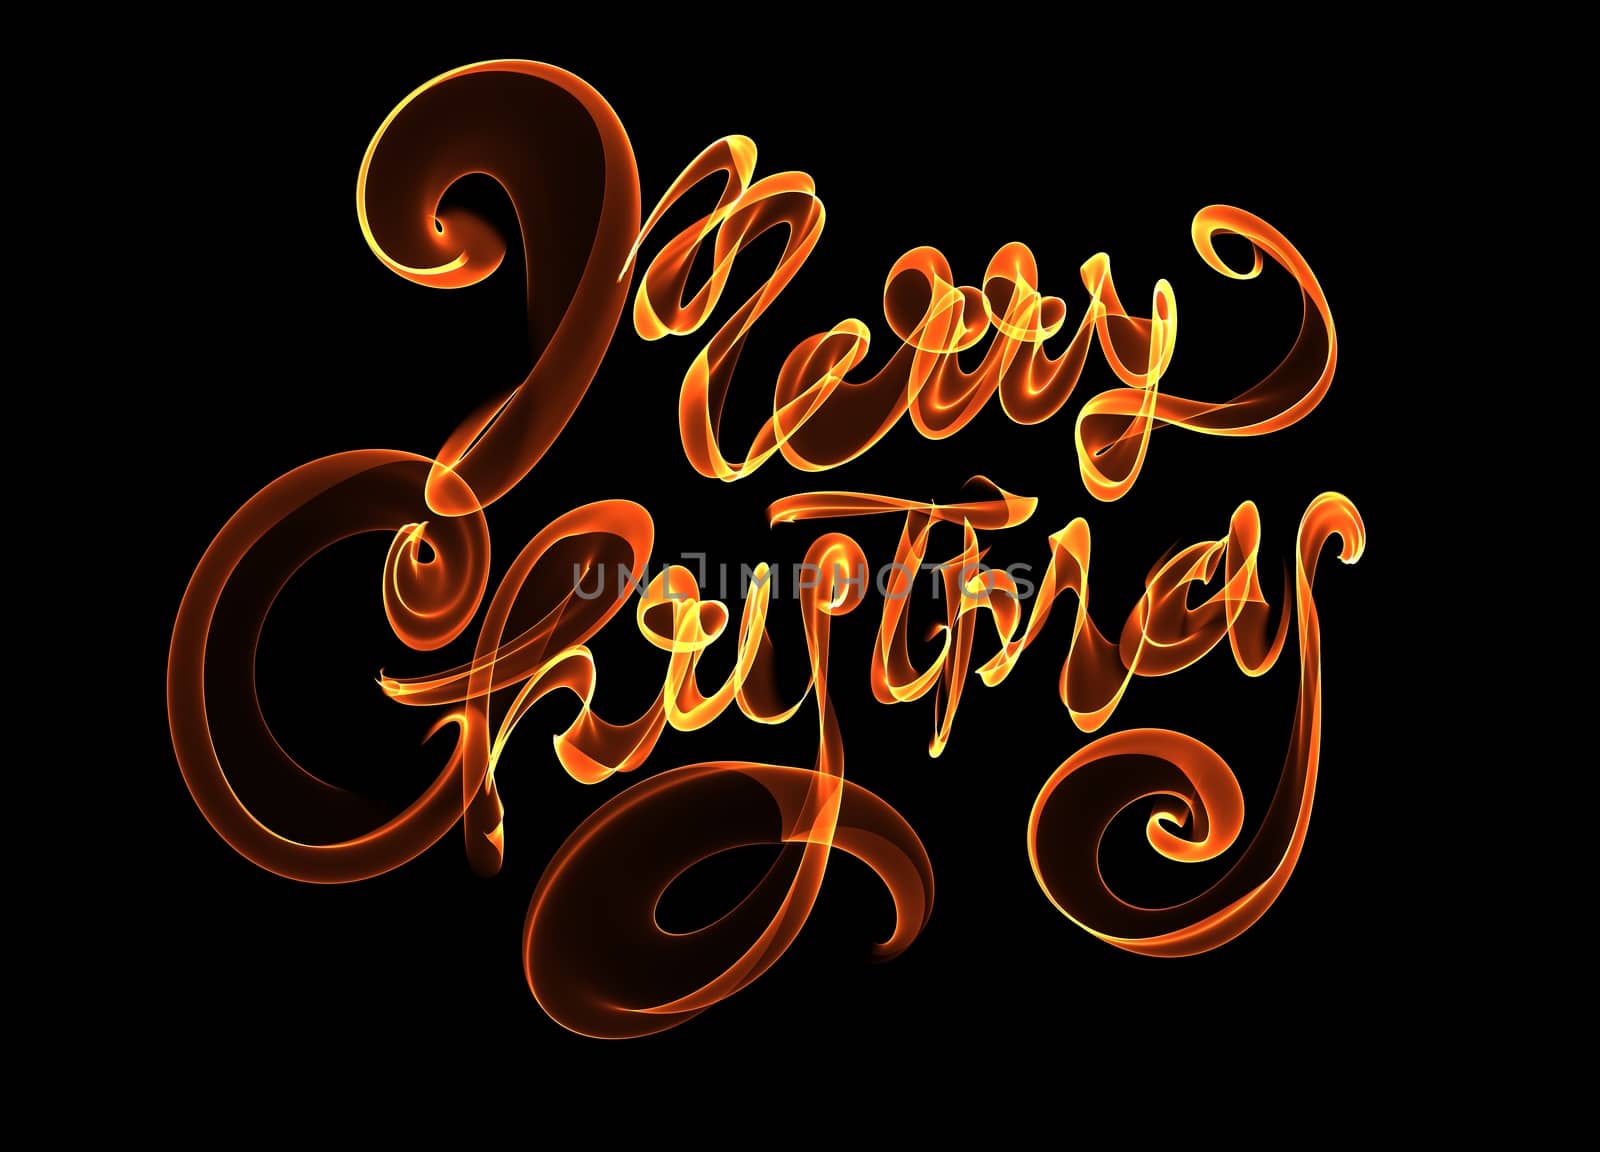 Merry Christmas isolated text lettering written with flame fire light on black background. Orange red color.